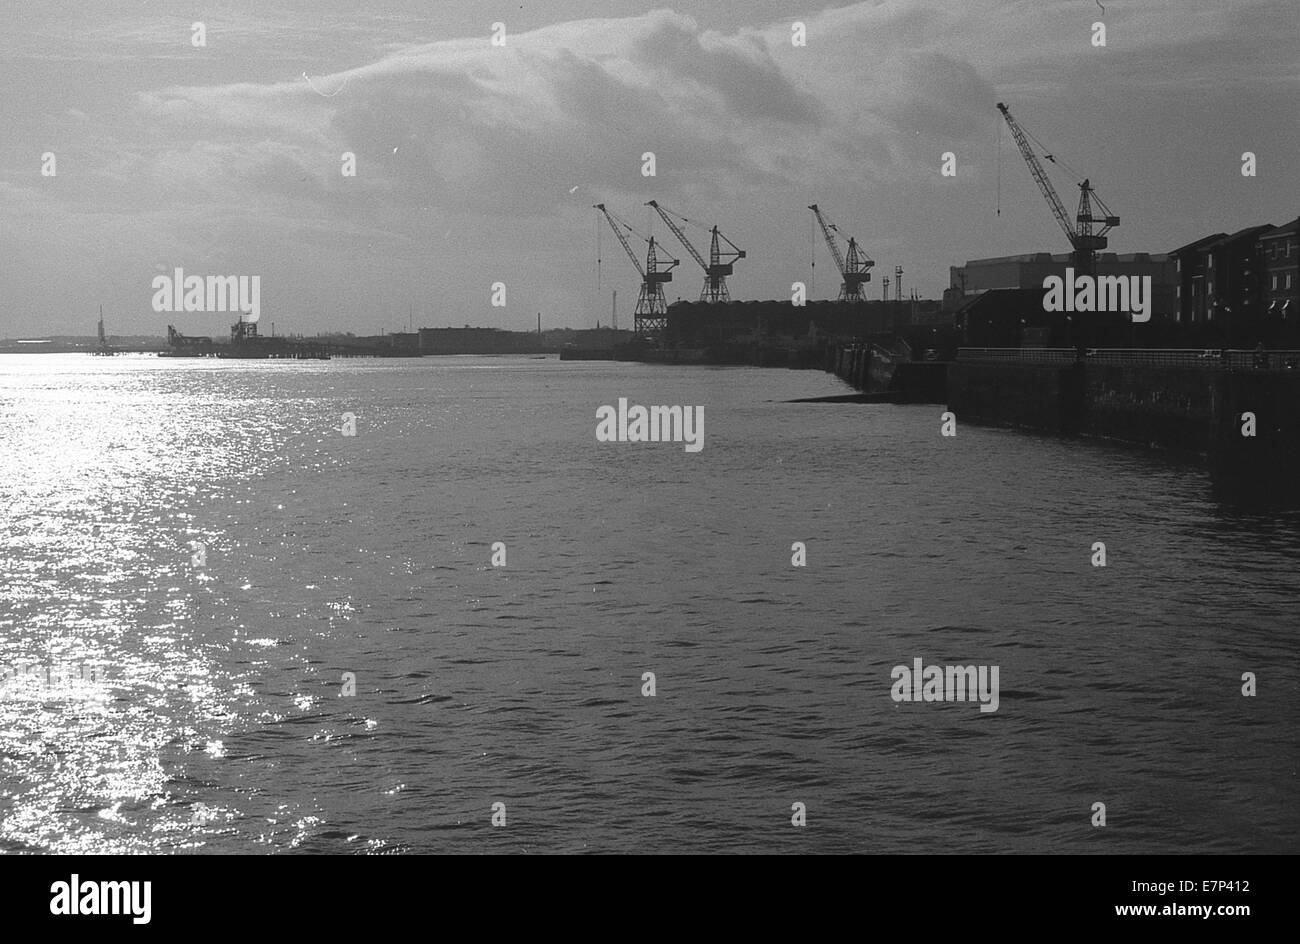 cammel lairds ship yard on the river mersey Stock Photo